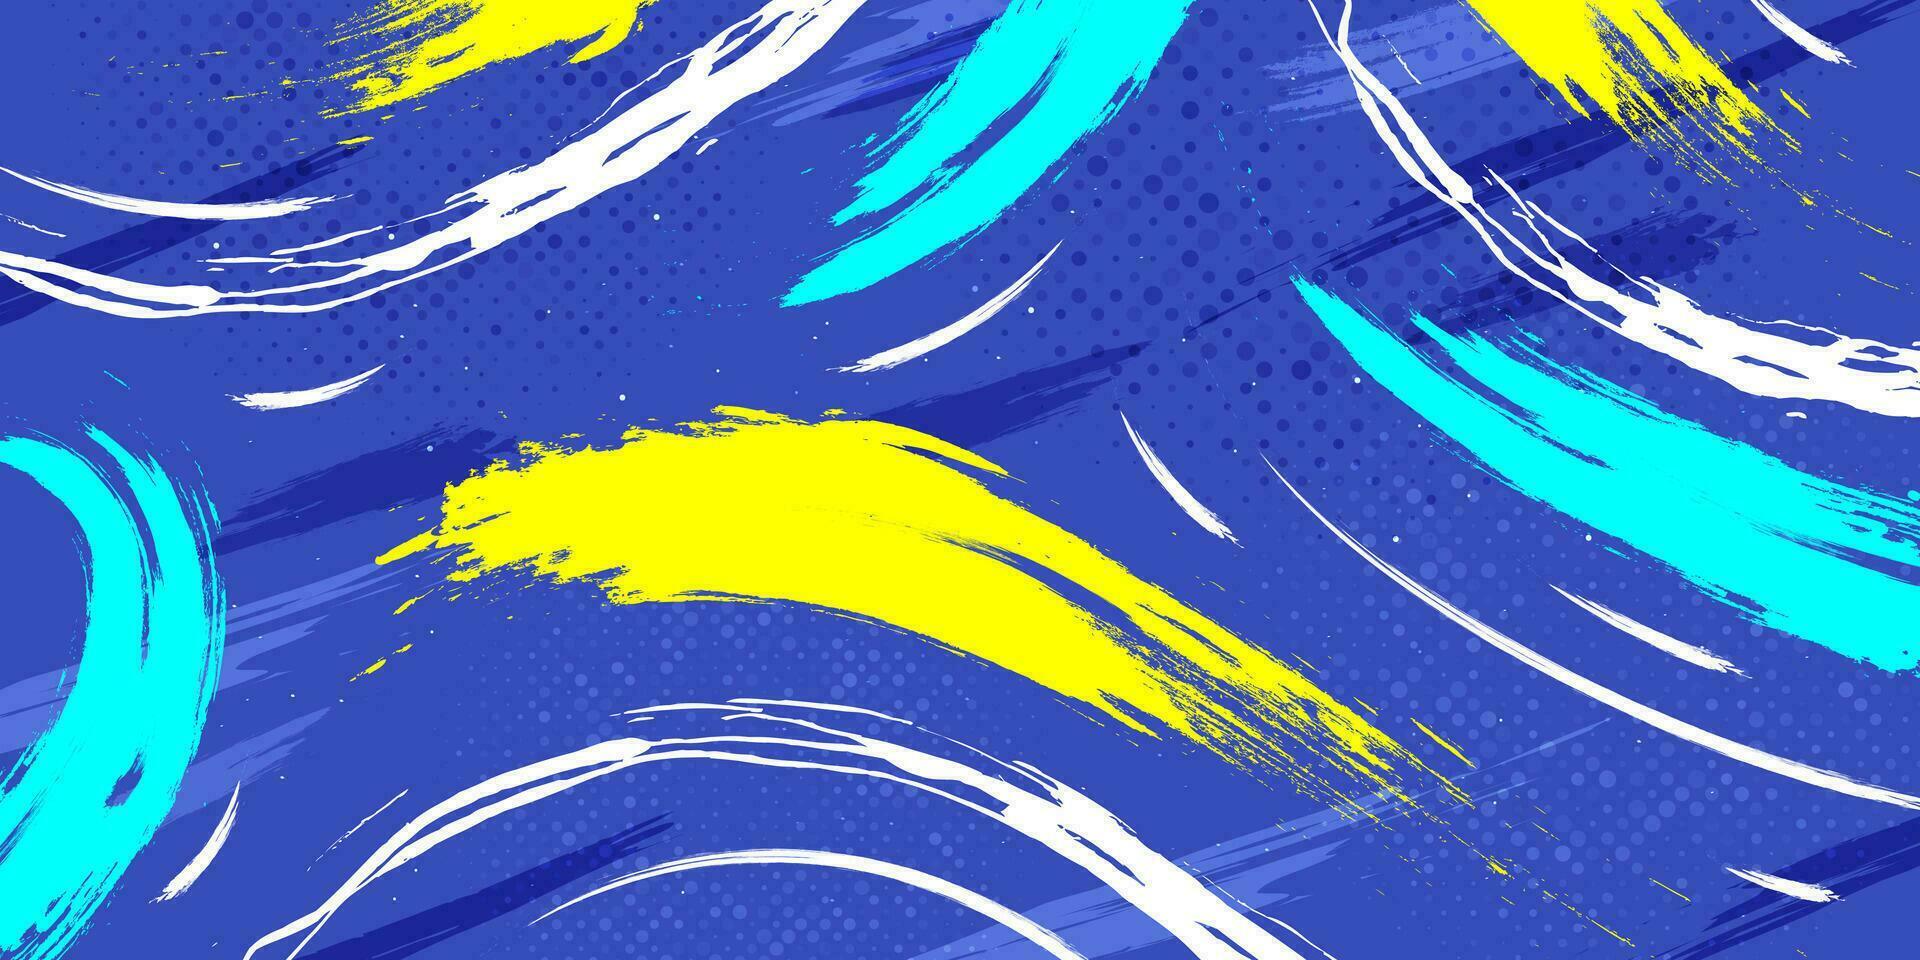 Abstract Brush Background with Sporty Style and Halftone Effect. Brush Stroke Illustration for Banner, Poster, or Sports Background. Scratch and Texture Elements For Design vector